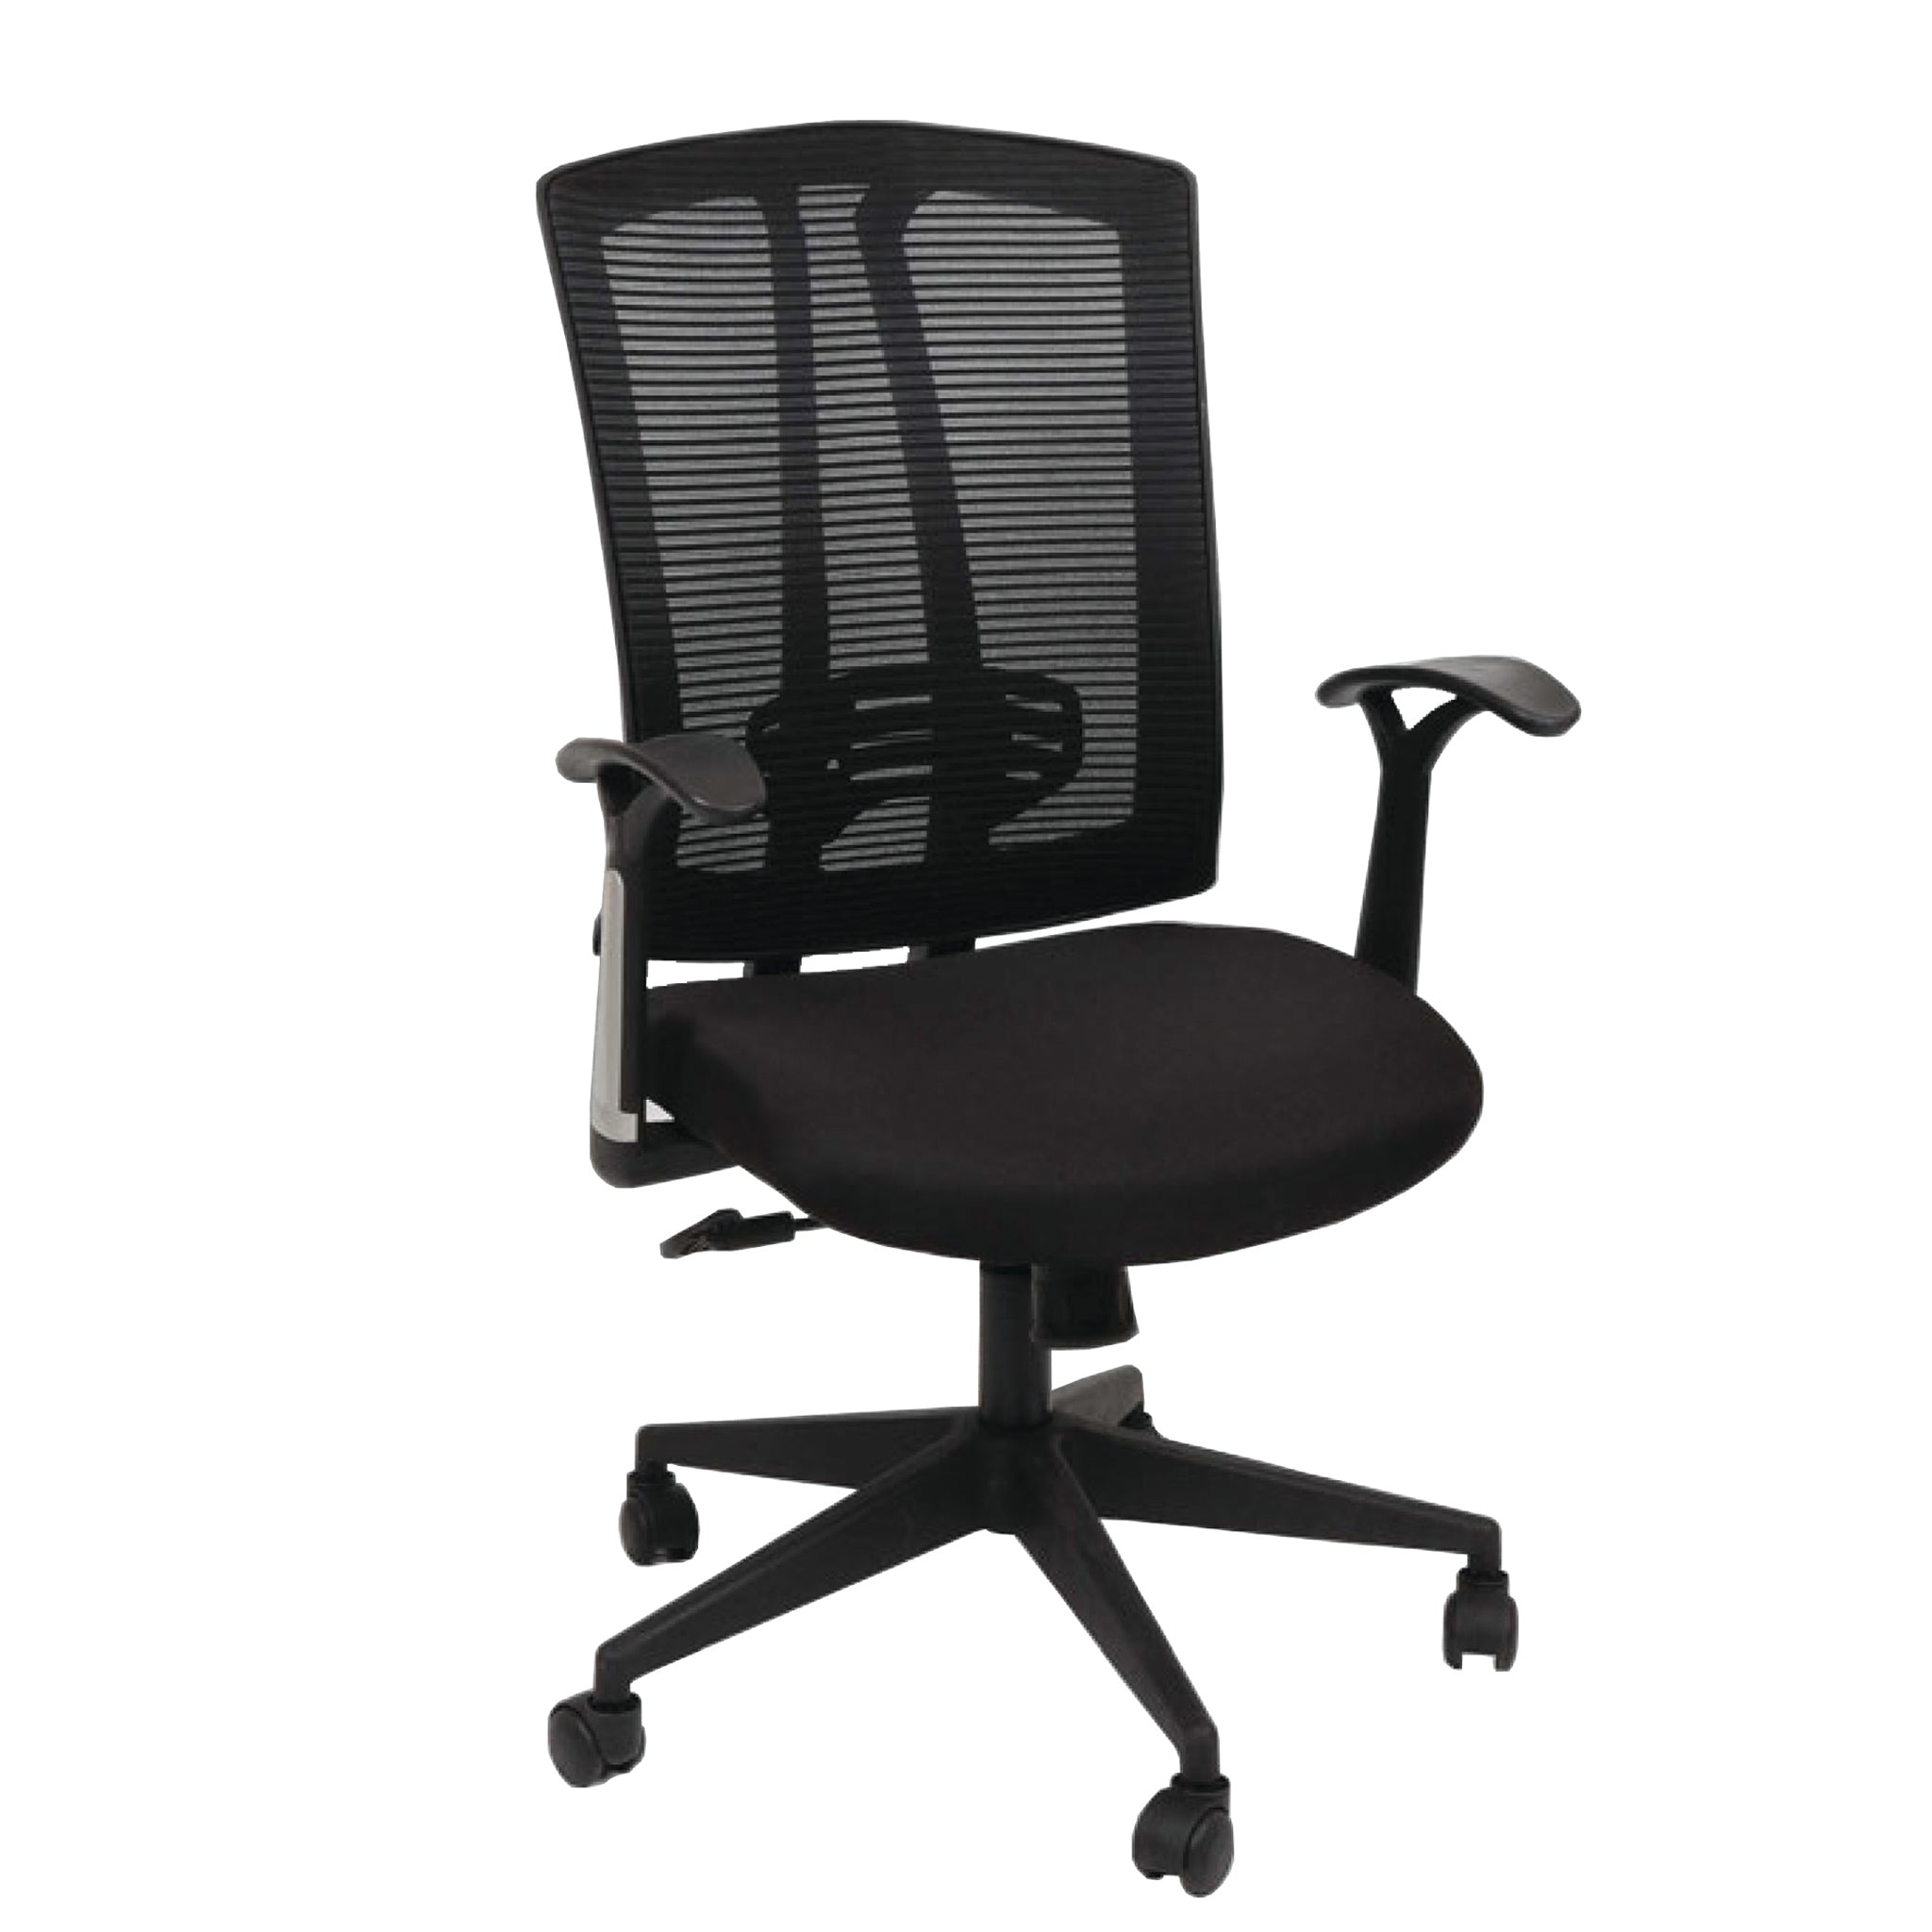 MM-1307 ASTERIX REVOLVING OFFICE CHAIR Mobel Furniture